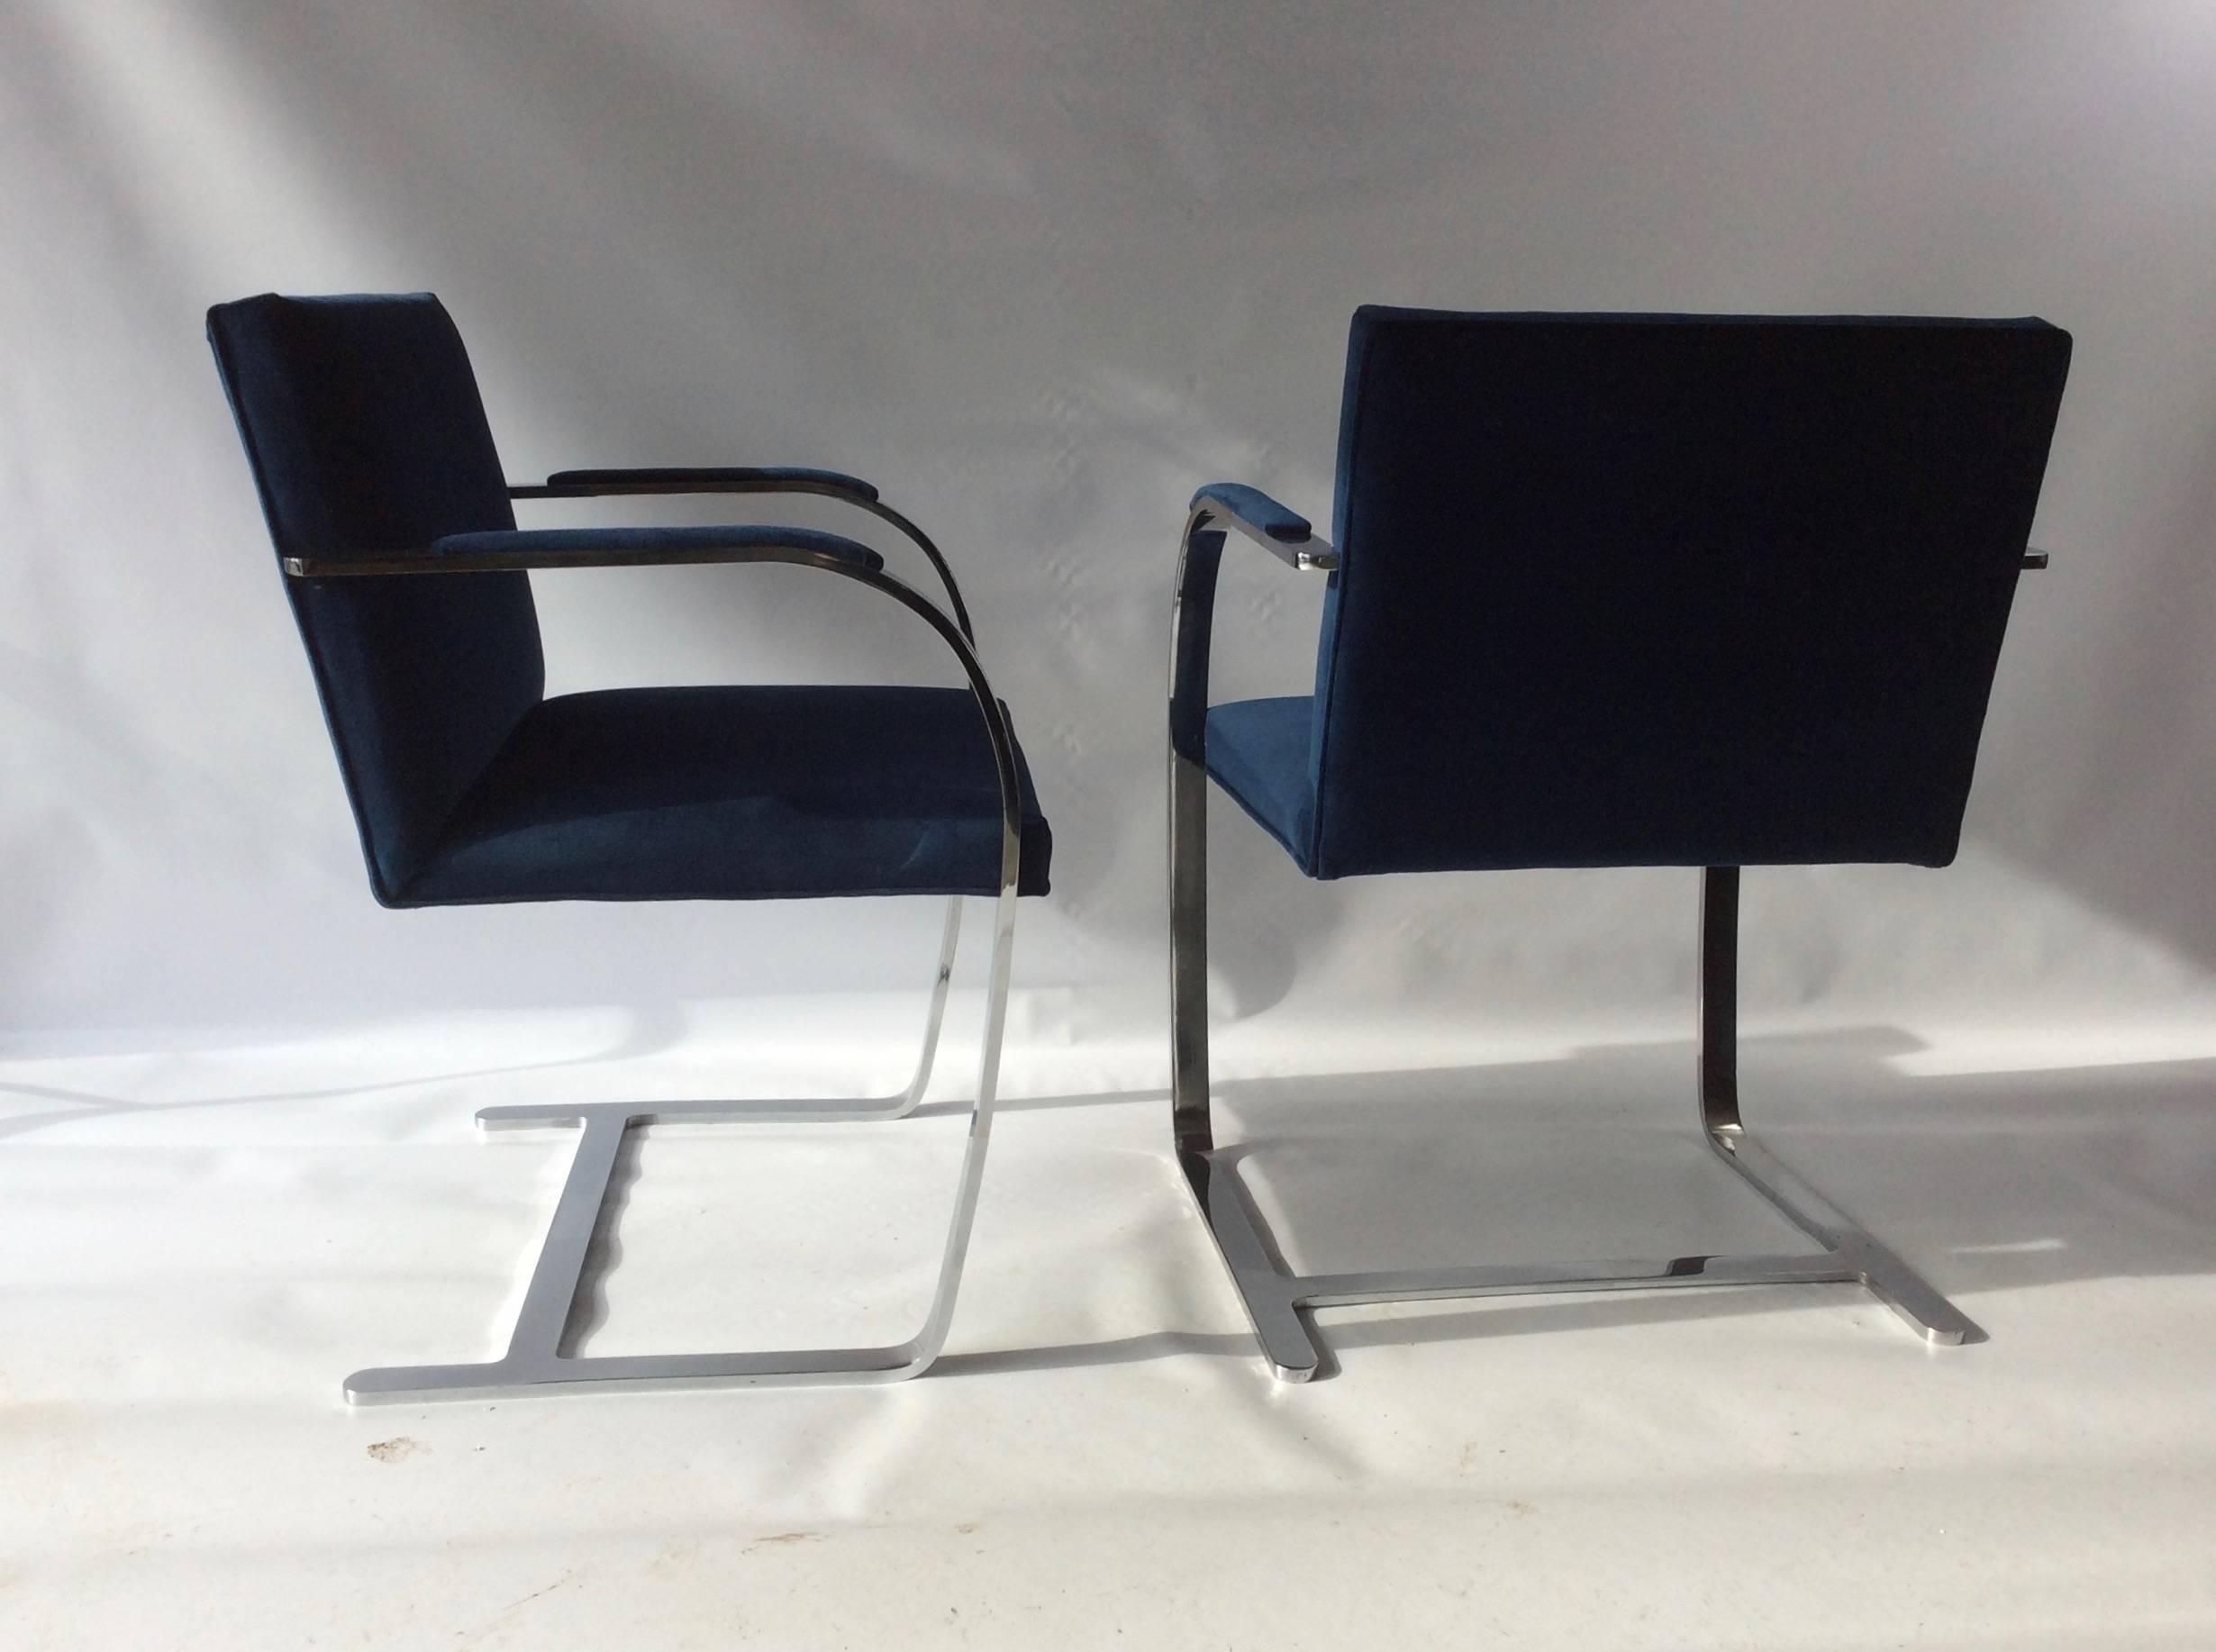 Mies Van Der Rohe, BRNO Flat Bar Chrome Cantilevered Chairs, New Upholstery 1